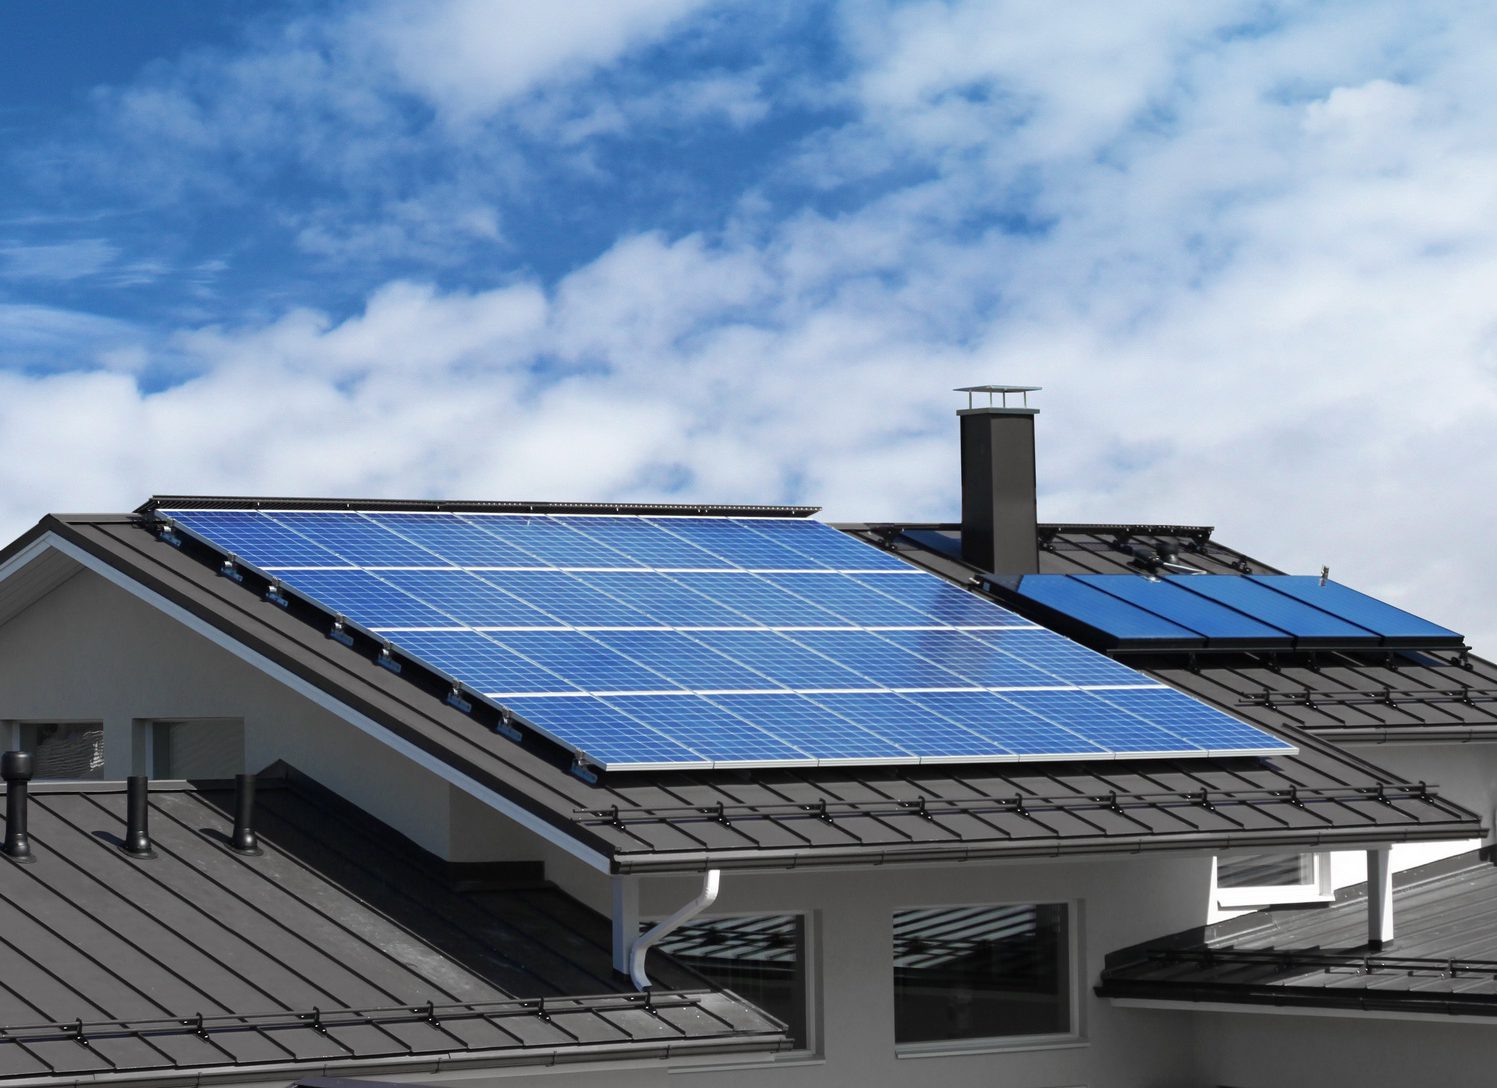 How Do Solar Panels Work For Your Home